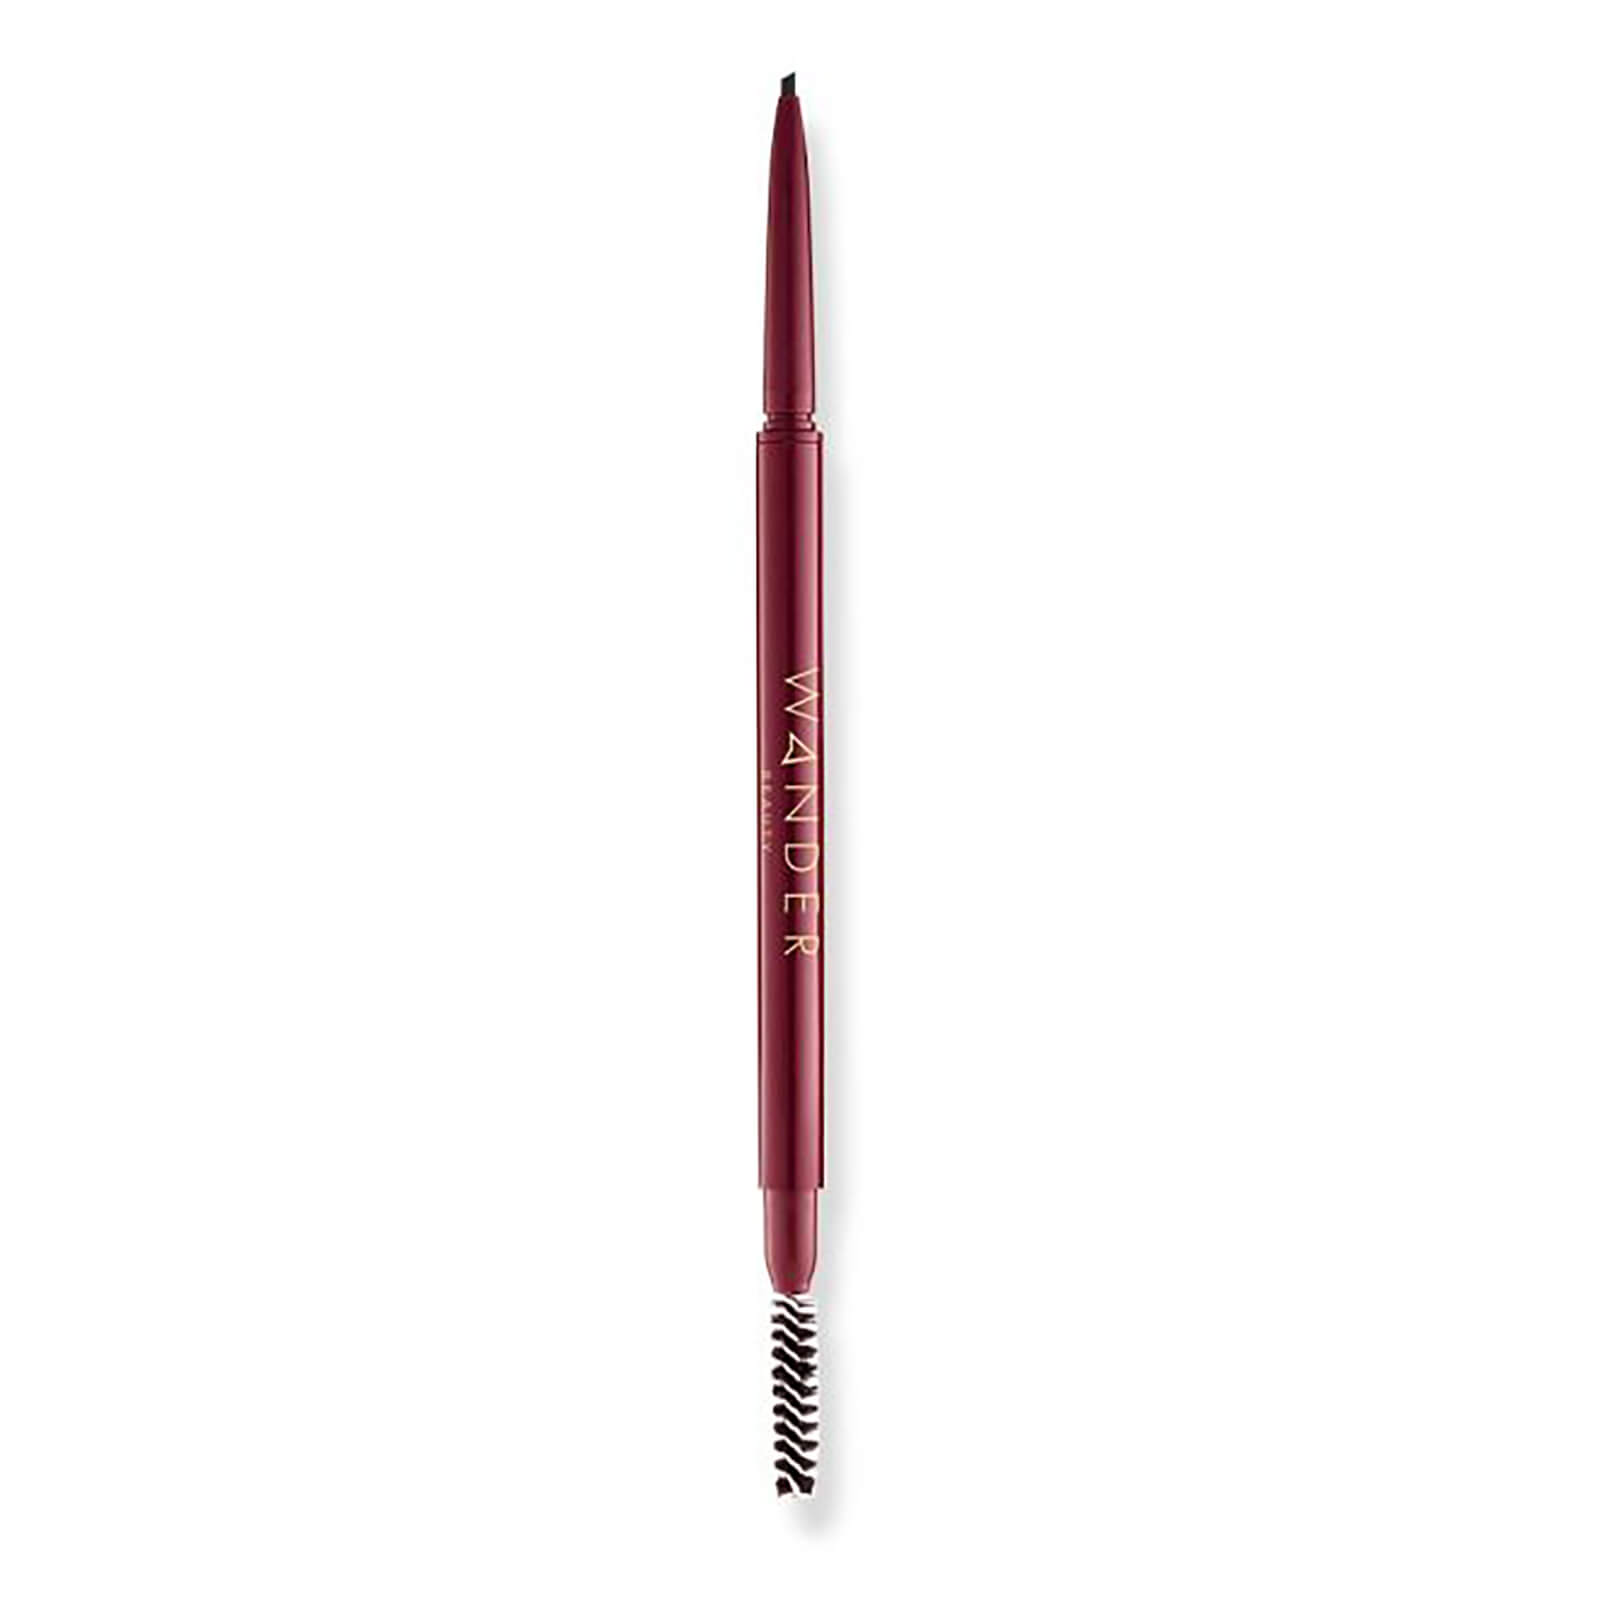 Wander Beauty Frame your Face Micro Brow Pencil 0.003 oz (Various Shades) - Dark Brown